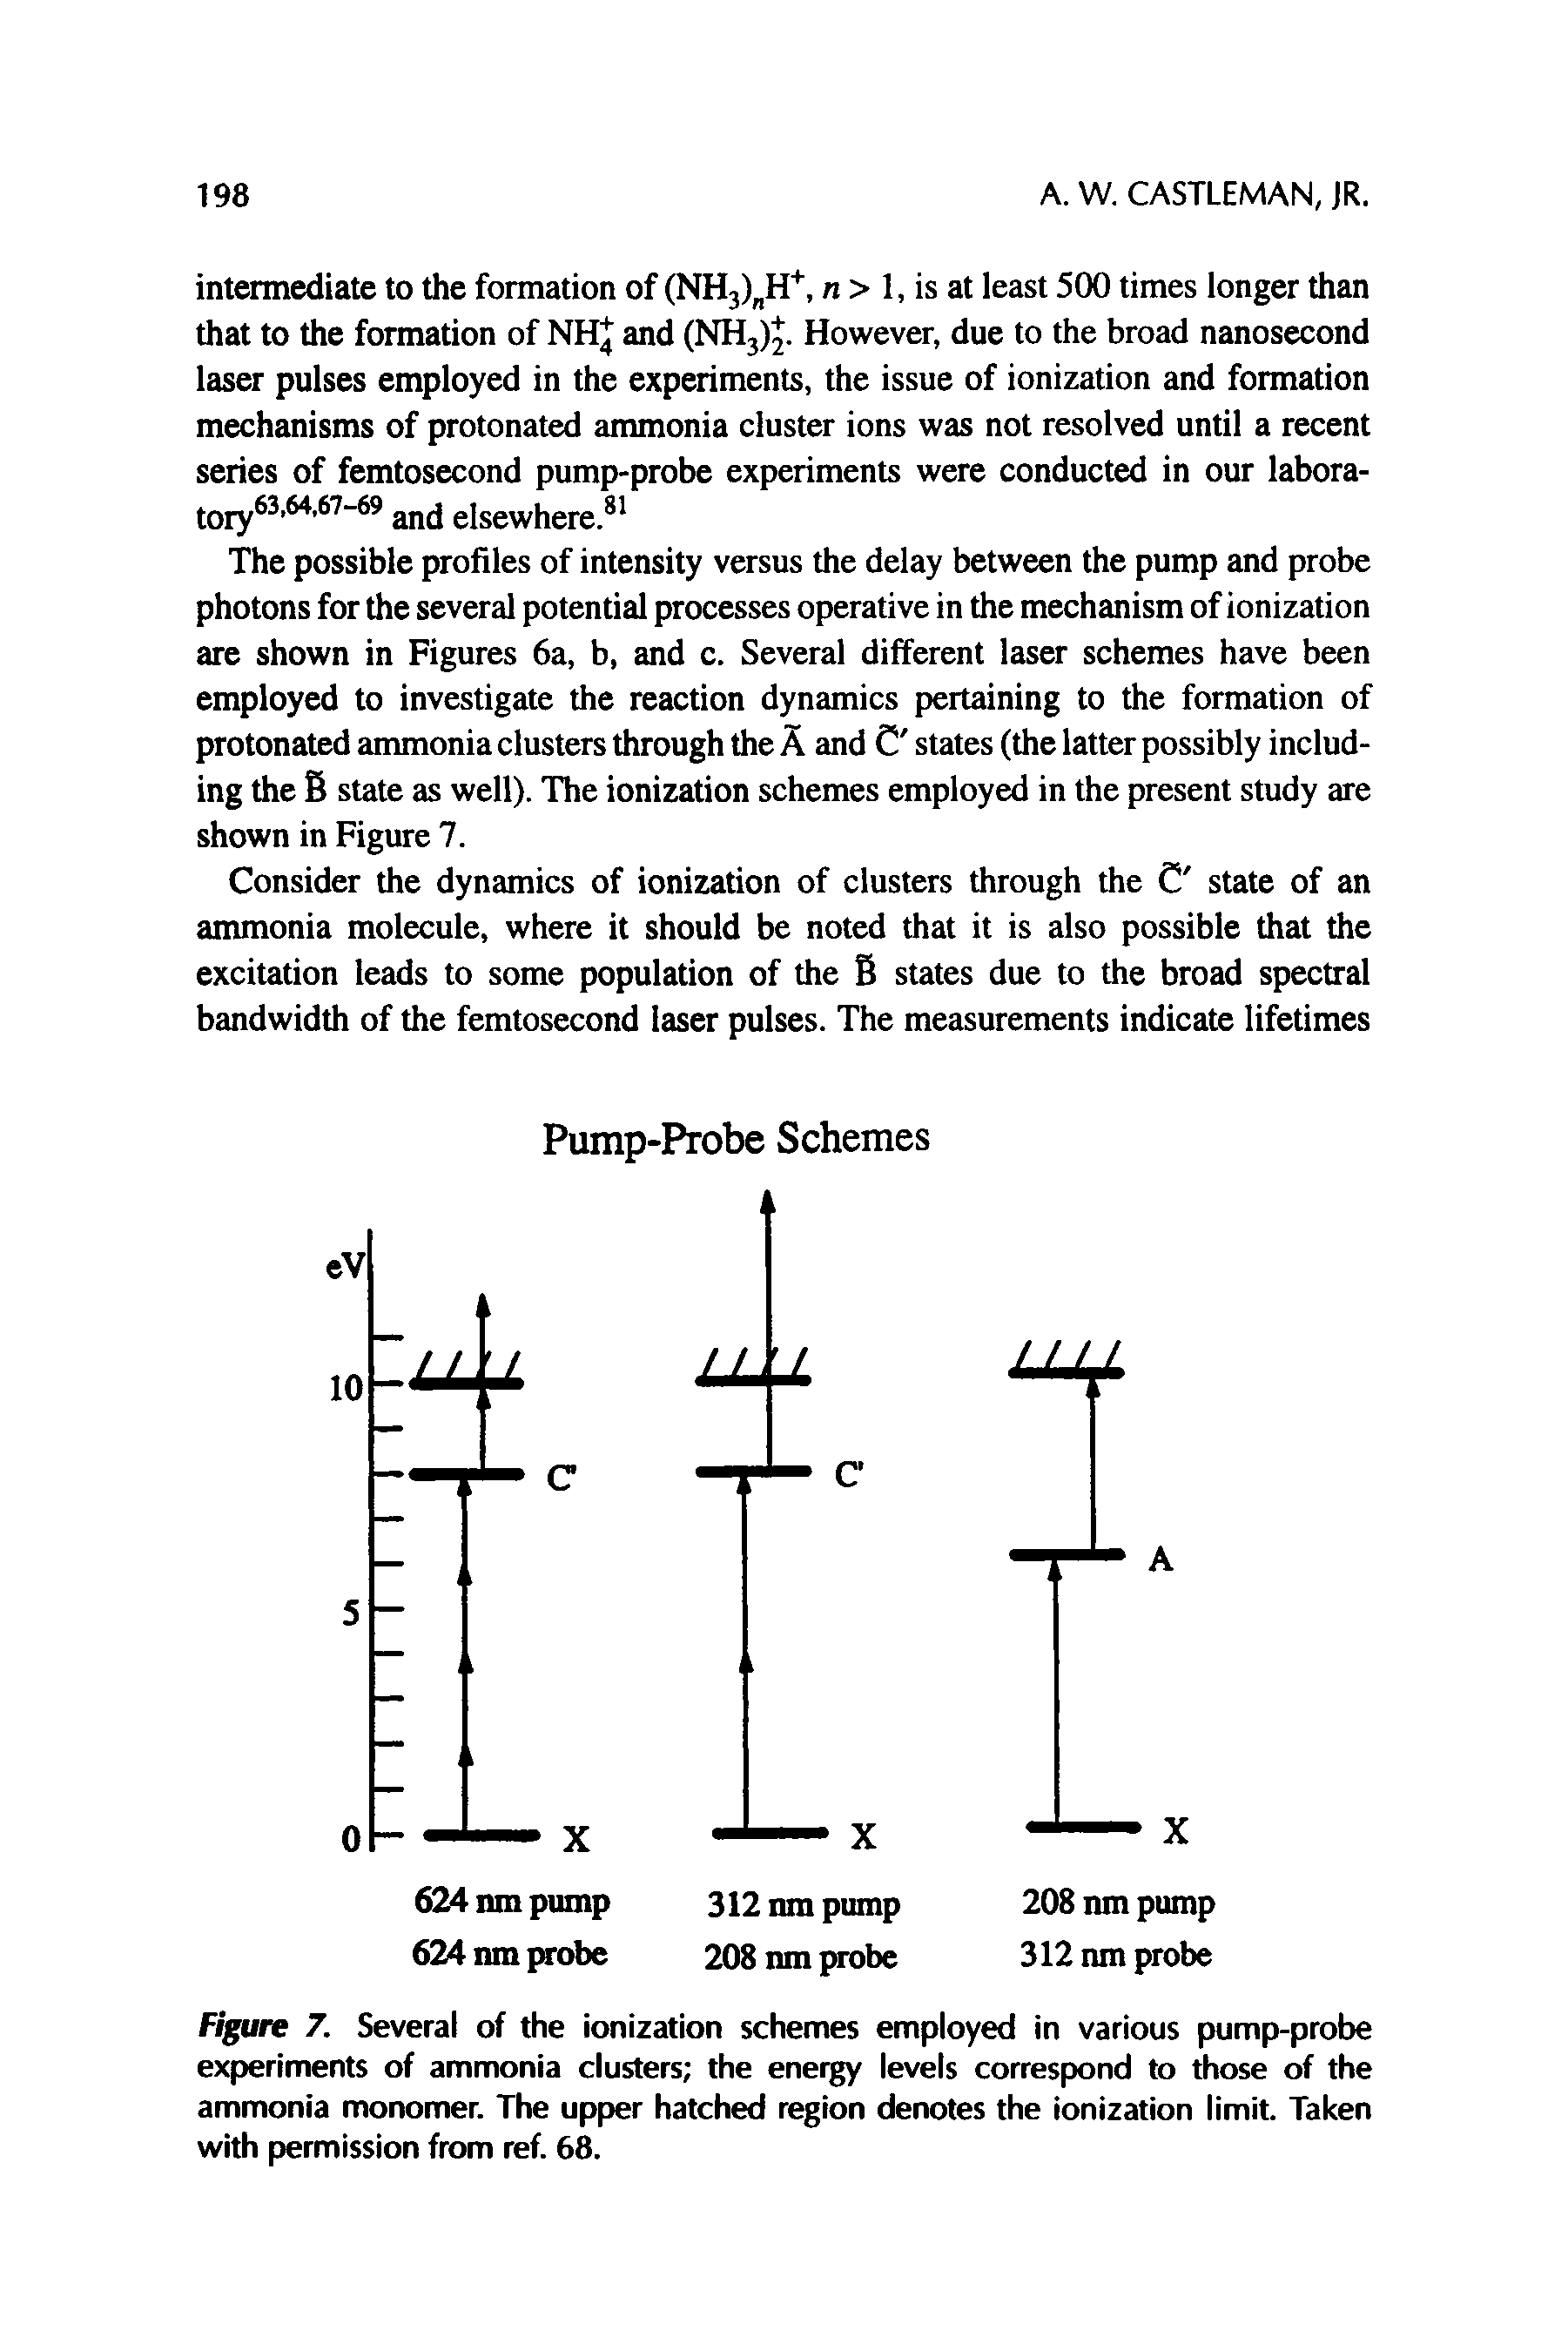 Figure 7. Several of the ionization schemes employed in various pump-probe experiments of ammonia clusters the energy levels correspond to those of the ammonia monomer. The upper hatched region denotes the ionization limit. Taken with permission from ref. 68.